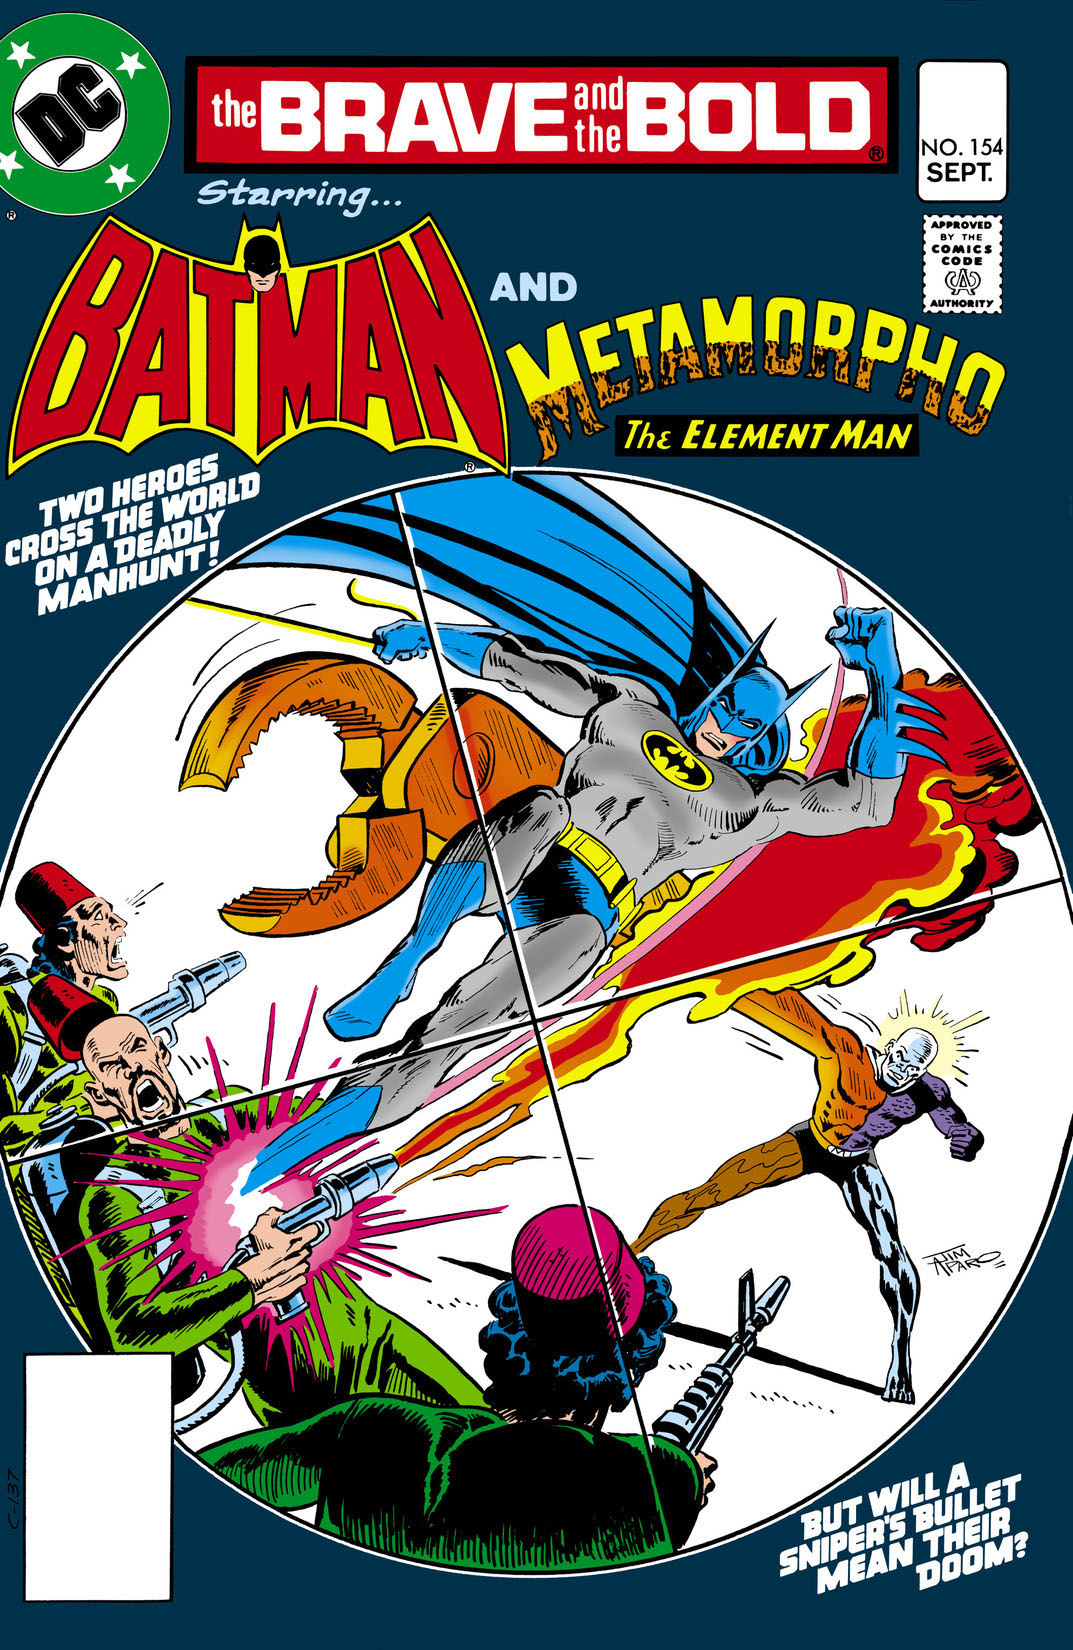 The Brave and the Bold (1955-) #154 preview images